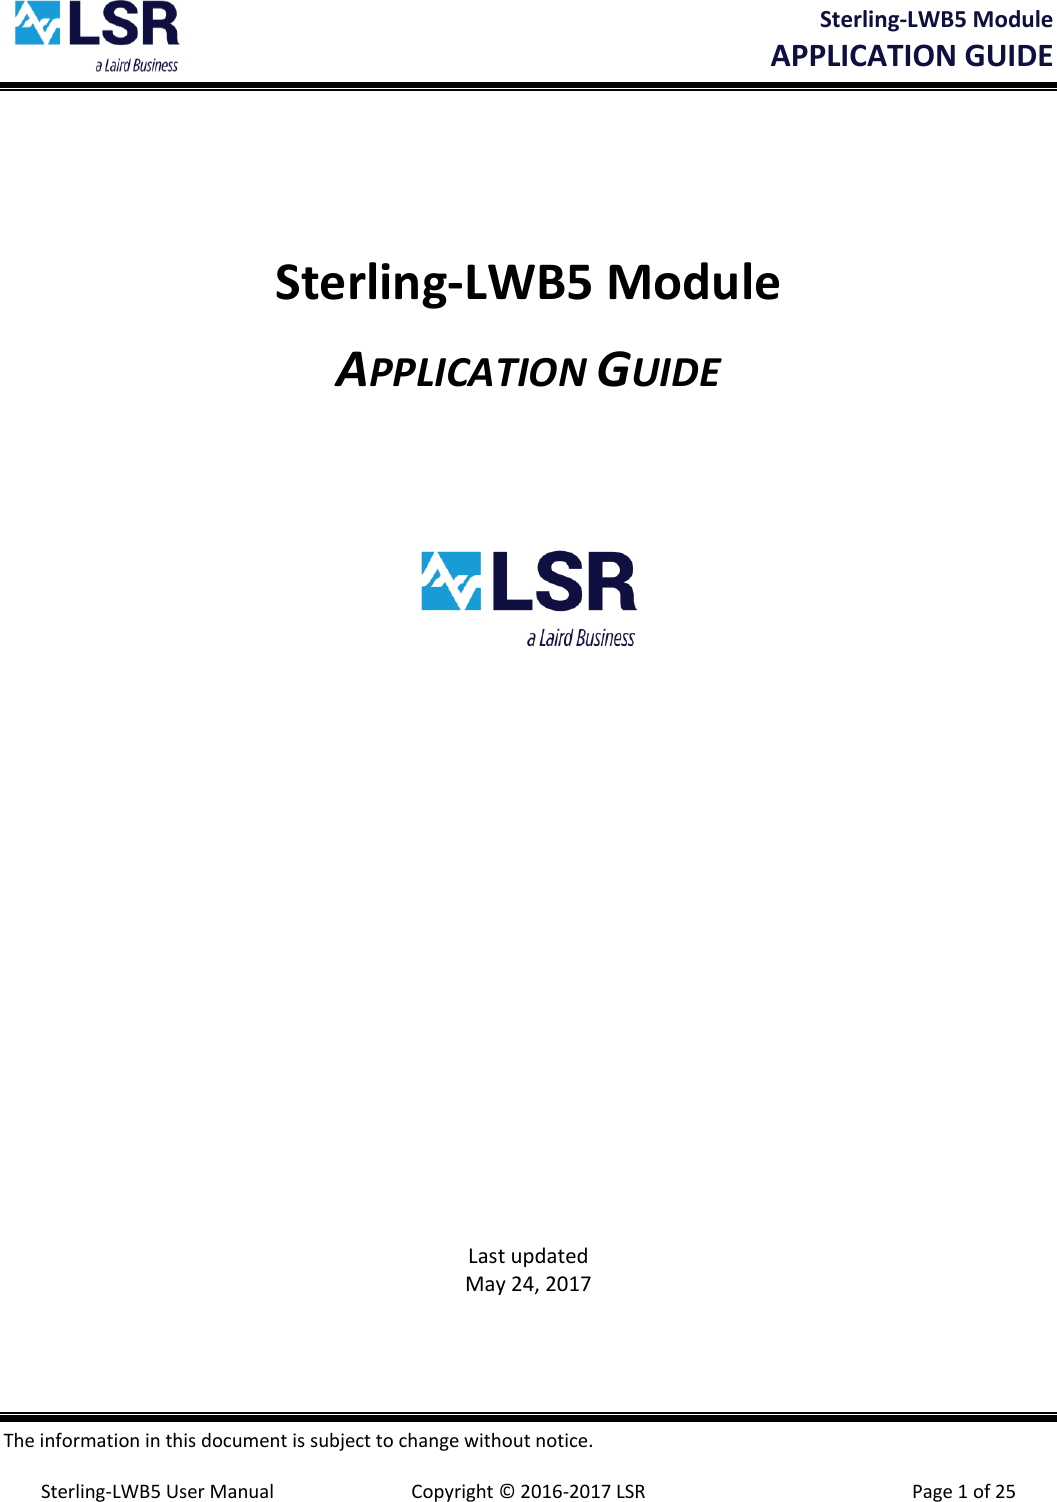  Sterling-LWB5 Module       APPLICATION GUIDE  The information in this document is subject to change without notice.  Sterling-LWB5 User Manual  Copyright © 2016-2017 LSR  Page 1 of 25 Sterling-LWB5 Module APPLICATION GUIDE              Last updated May 24, 2017